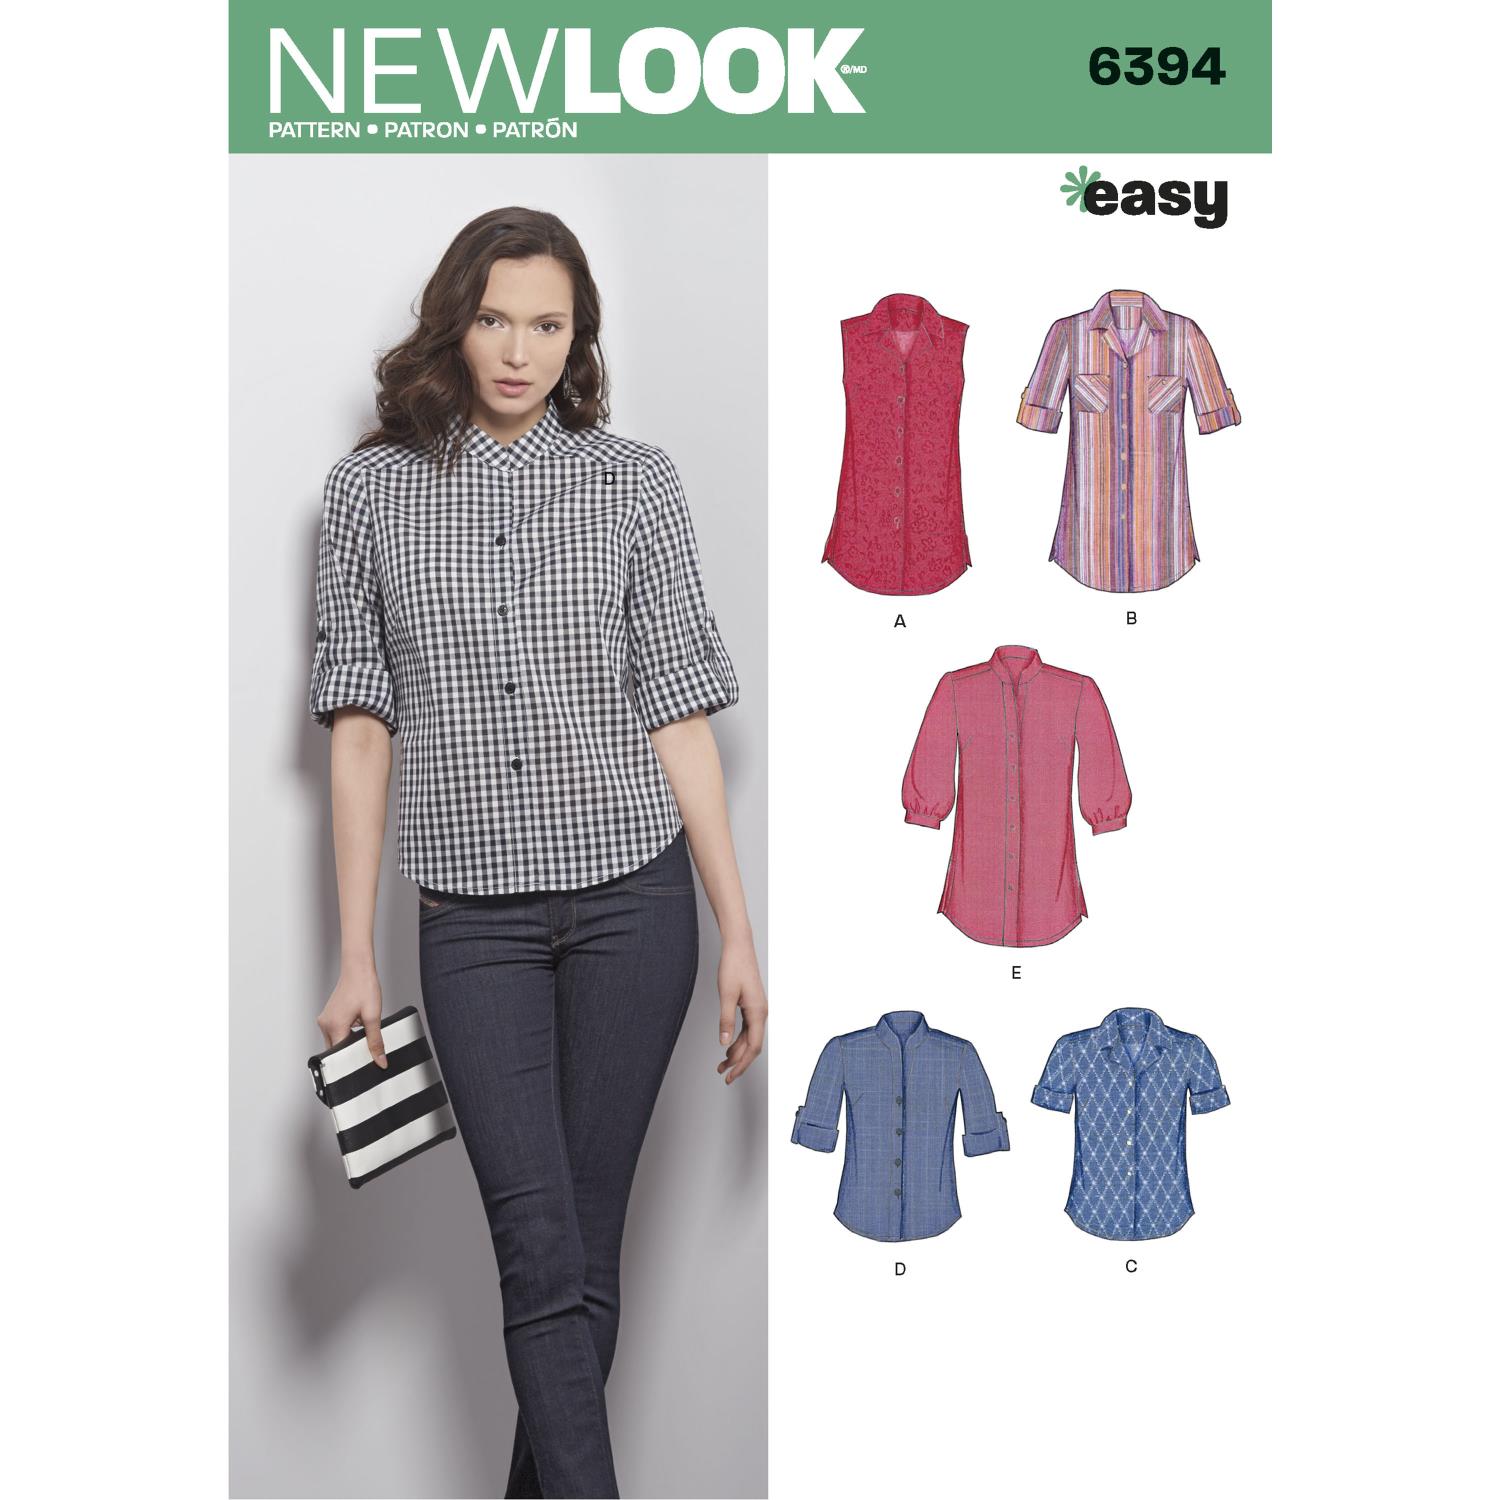 New Look 6394 Misses' Button Front Tops